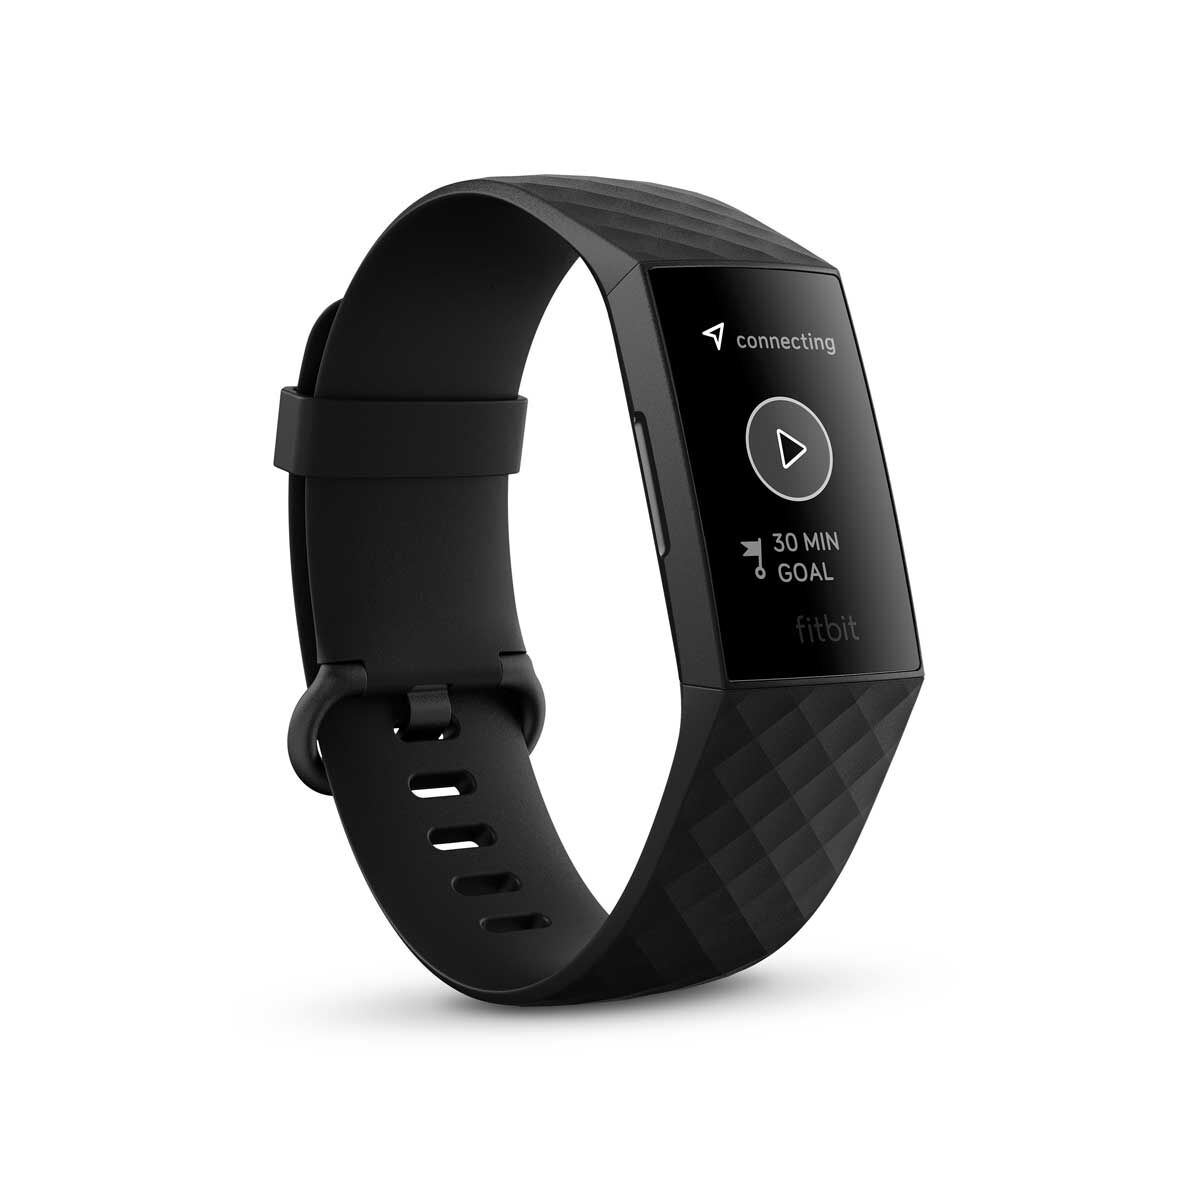 fitbit charge 3 rebel